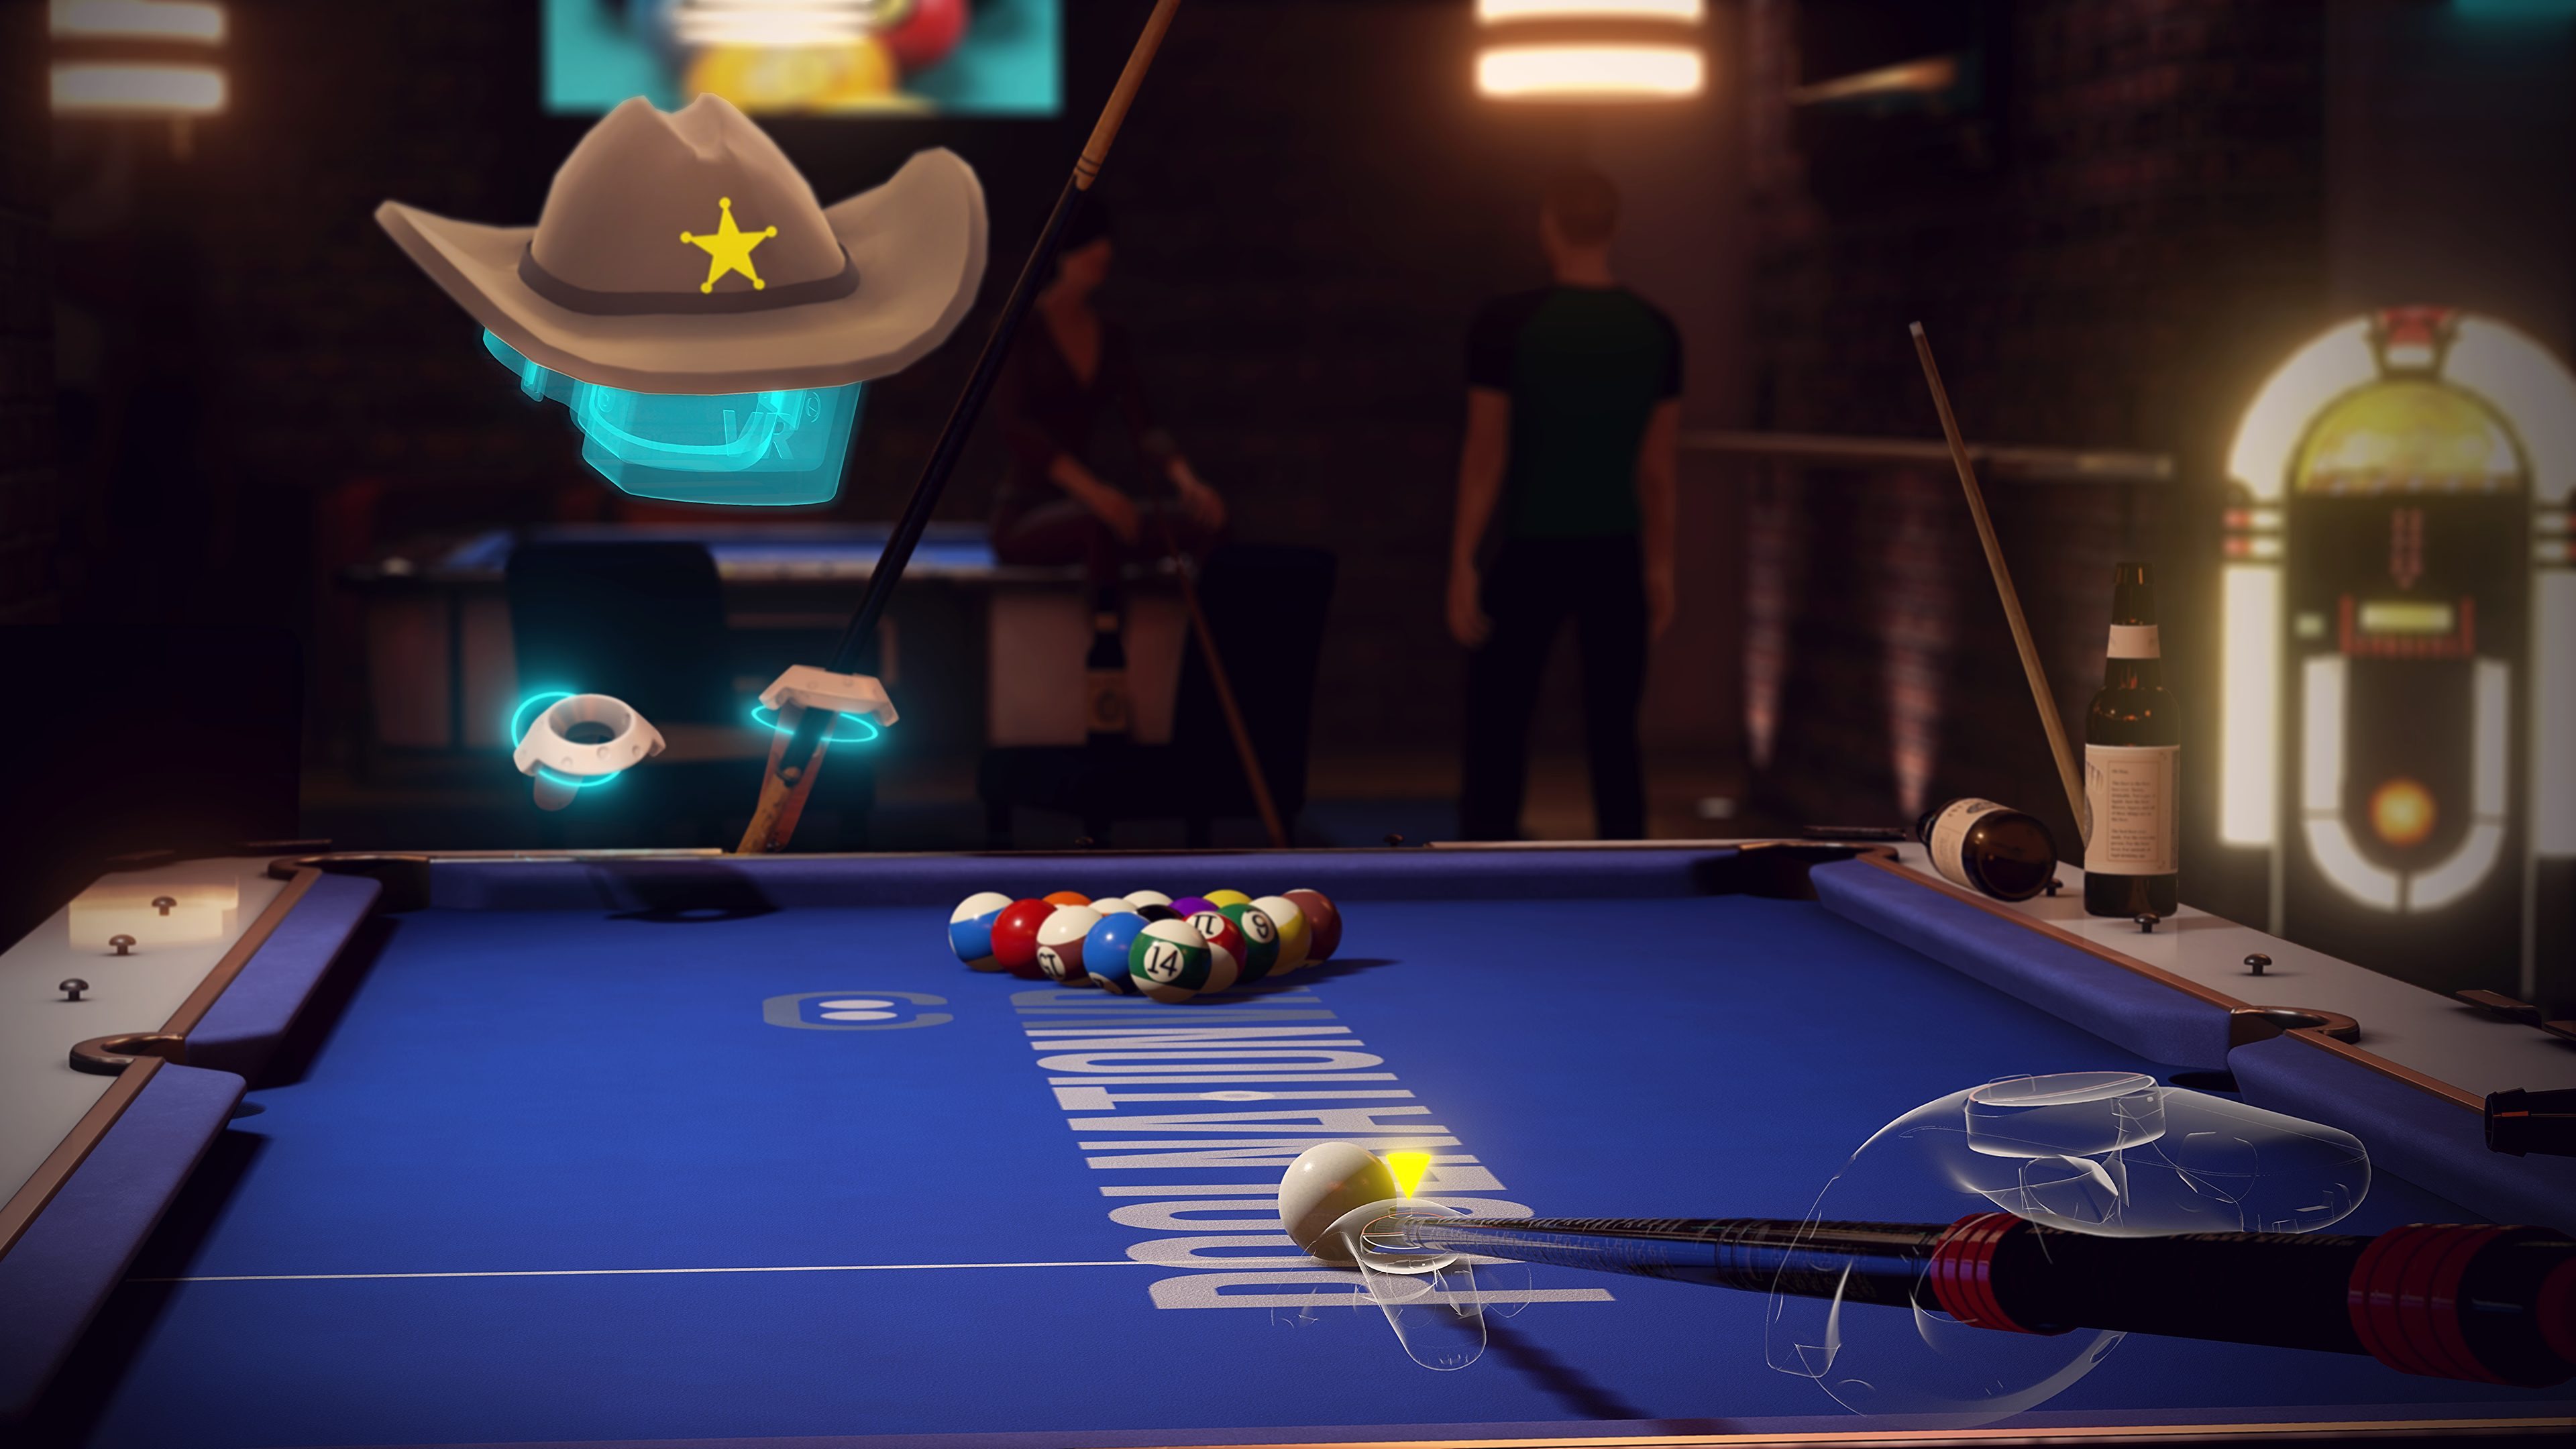 It s all in the game. Golf Pool VR. All-in-one Sports VR игра. Sports Bar VR. Бильярд ВР.